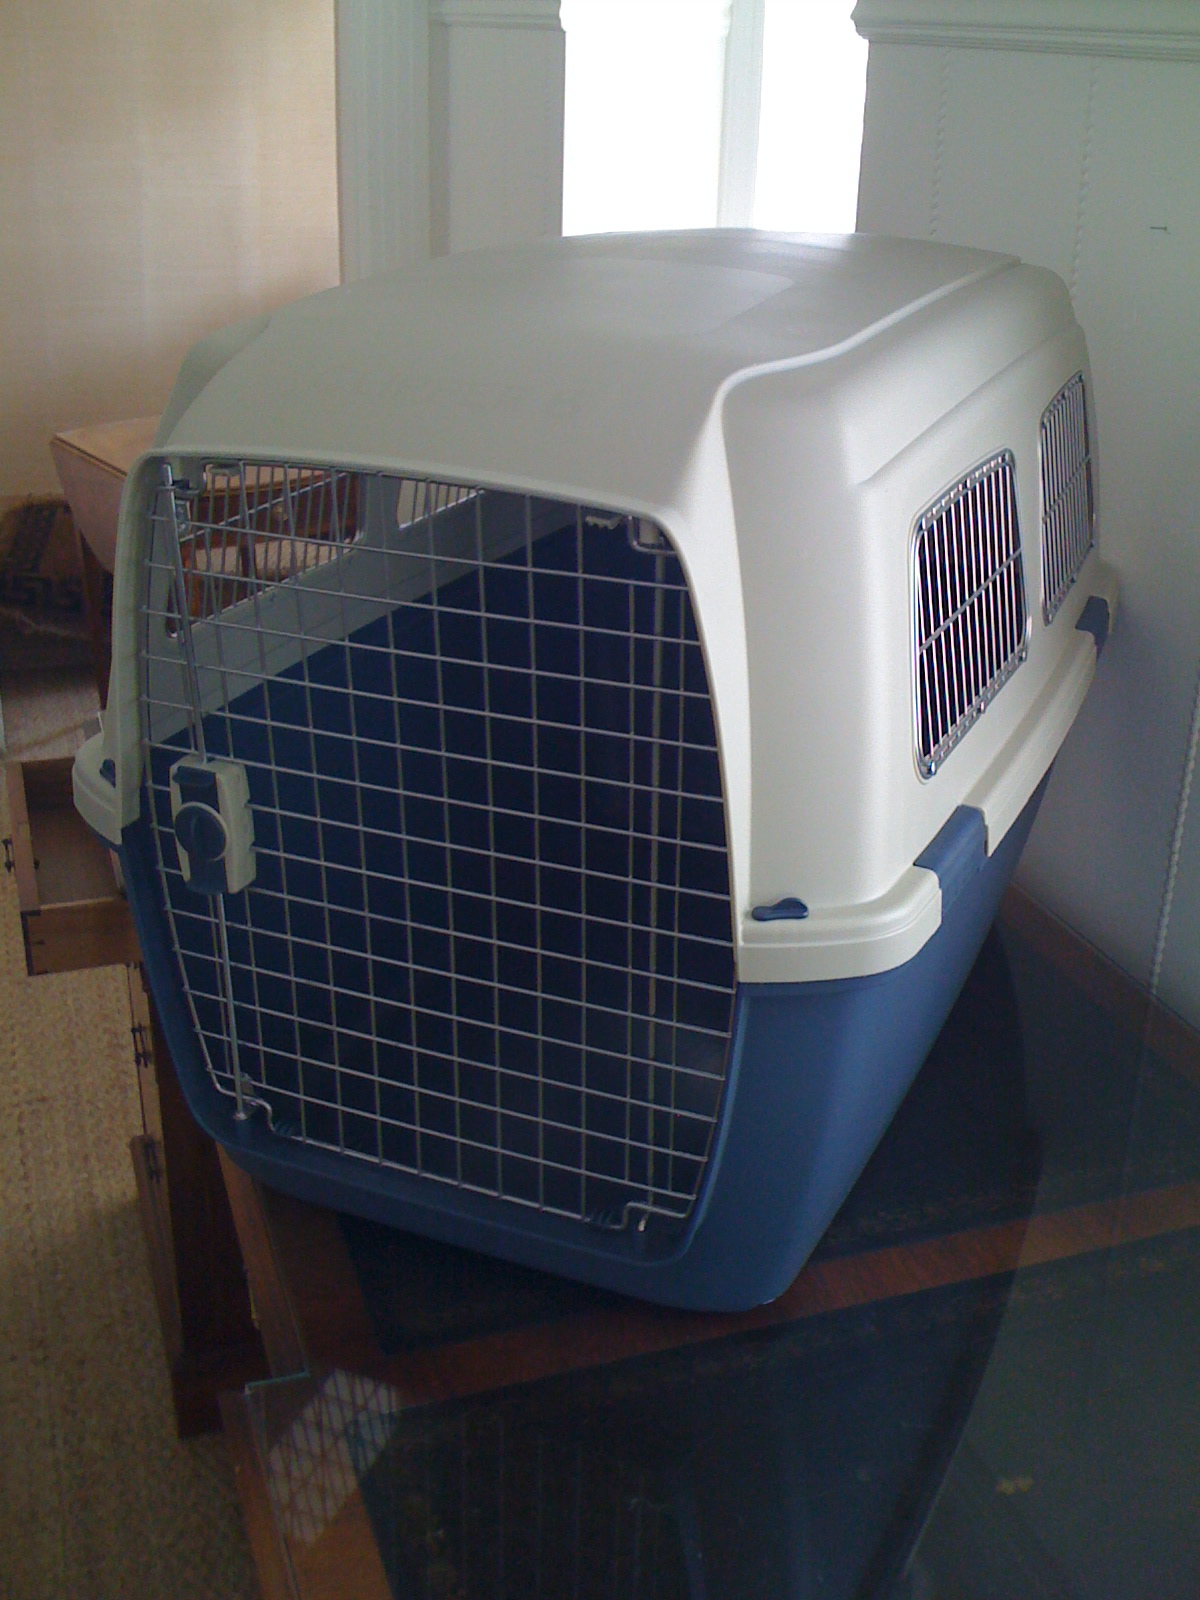 Grant K. Gibson Dog crate for sale - Grant K. Gibson